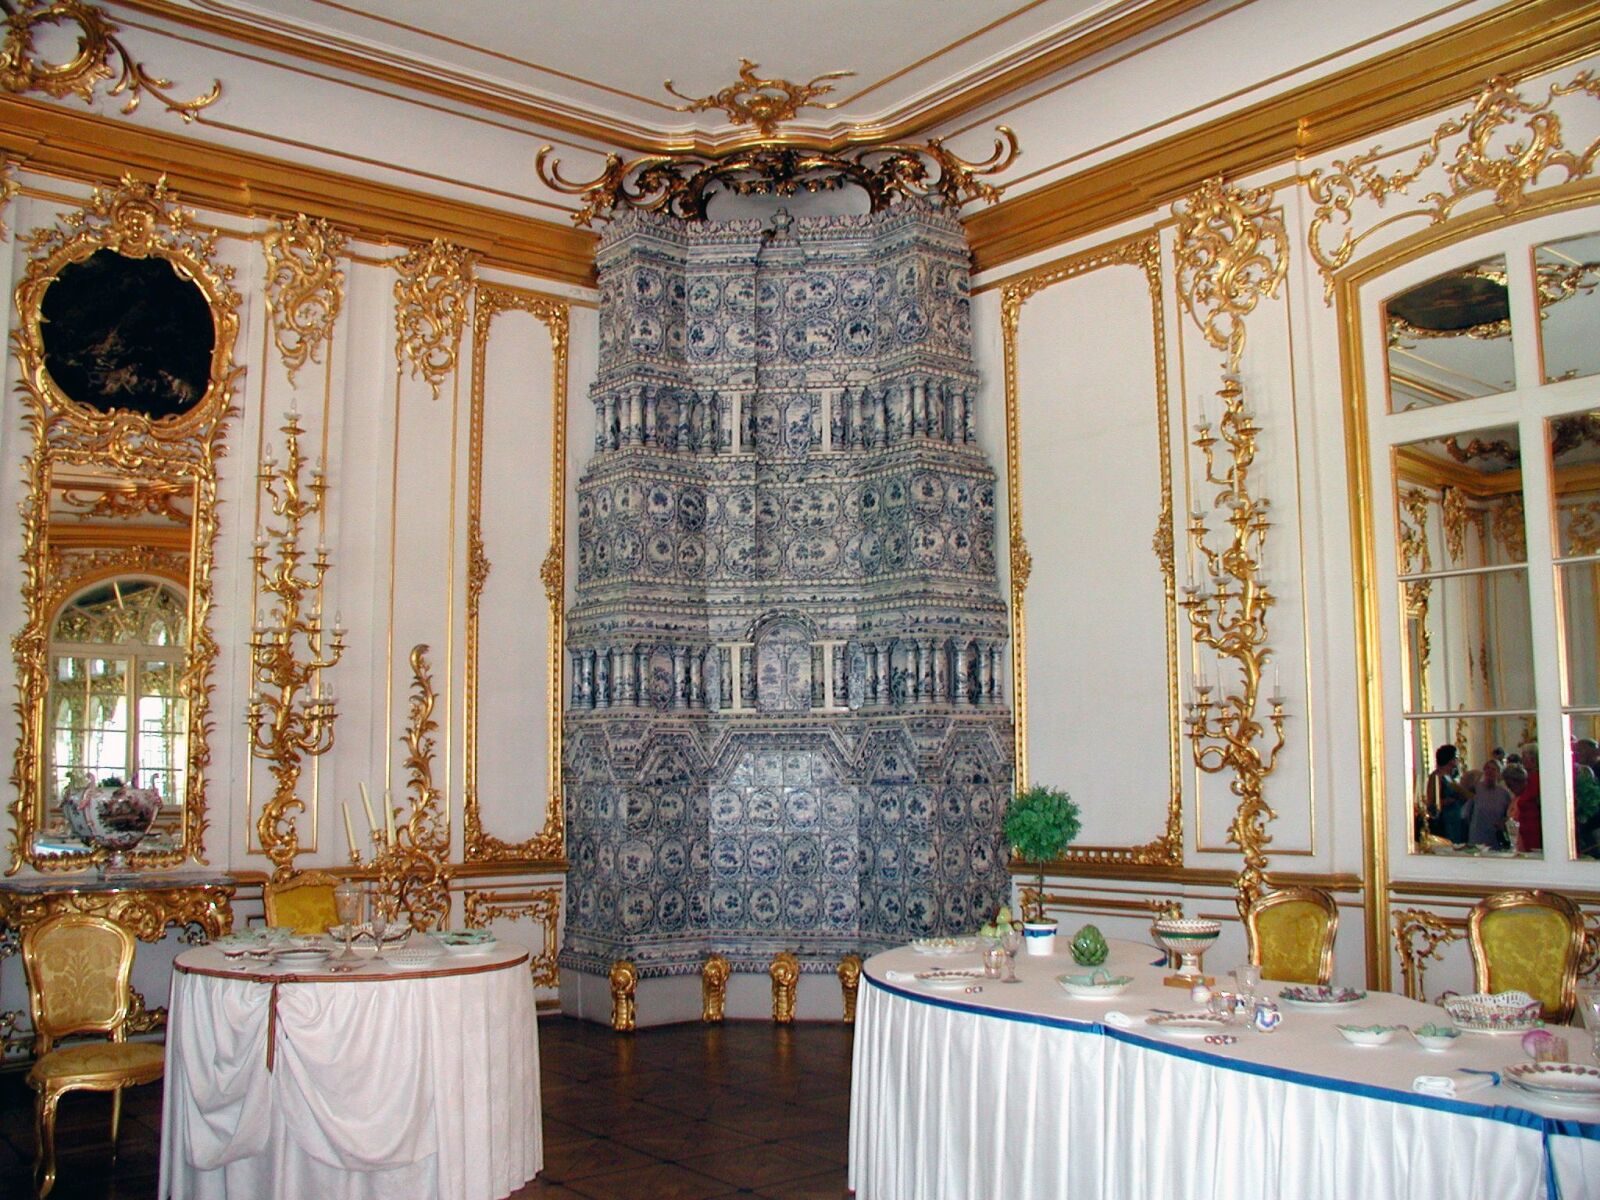 Olympus C3030Z sample photo. Russia, amber room, beautiful photography